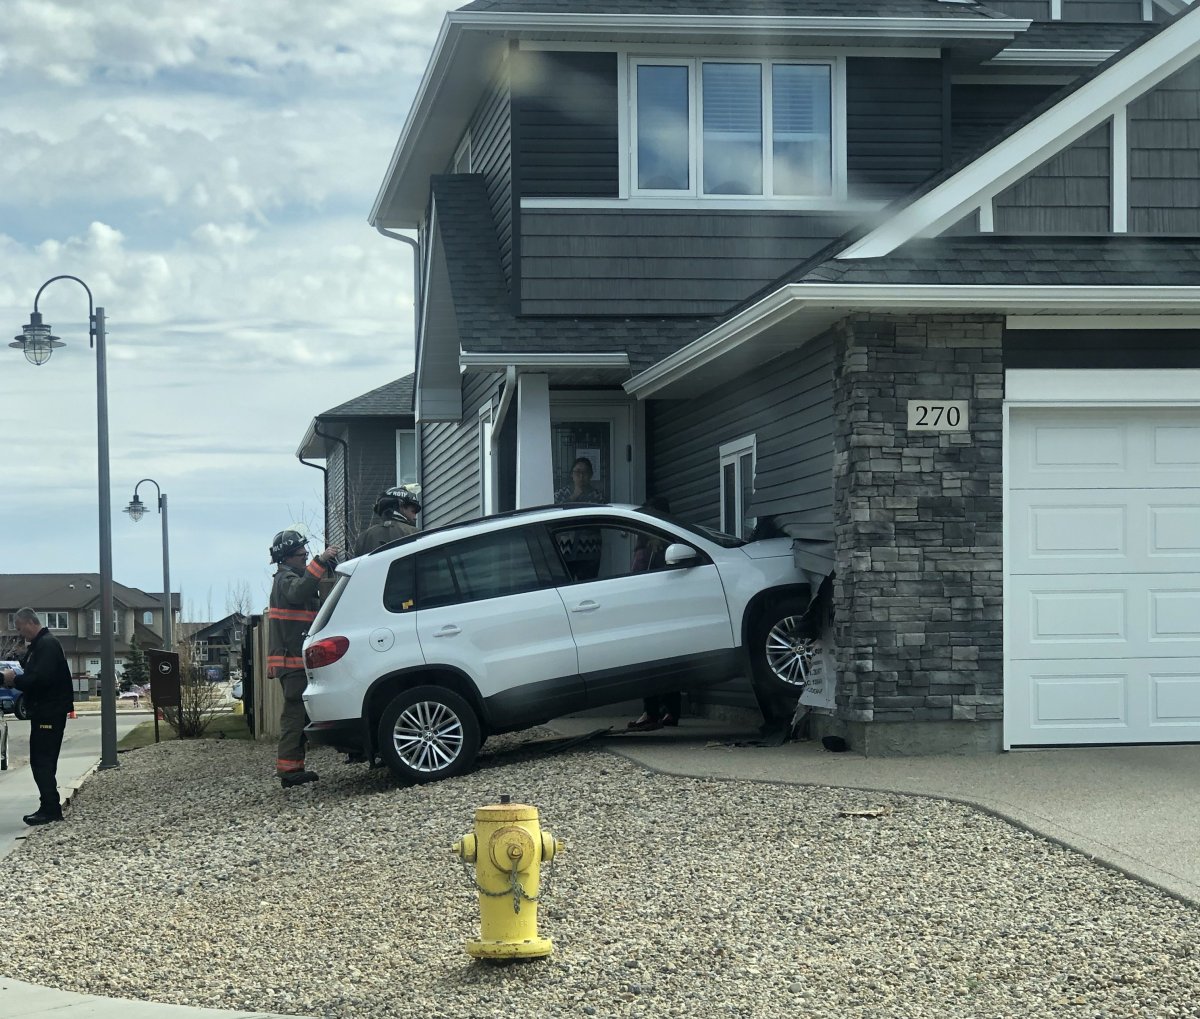 The crash caused minor damage to the vehicle and an unofficial fire department estimate put the damage to the garage at around $5,000.